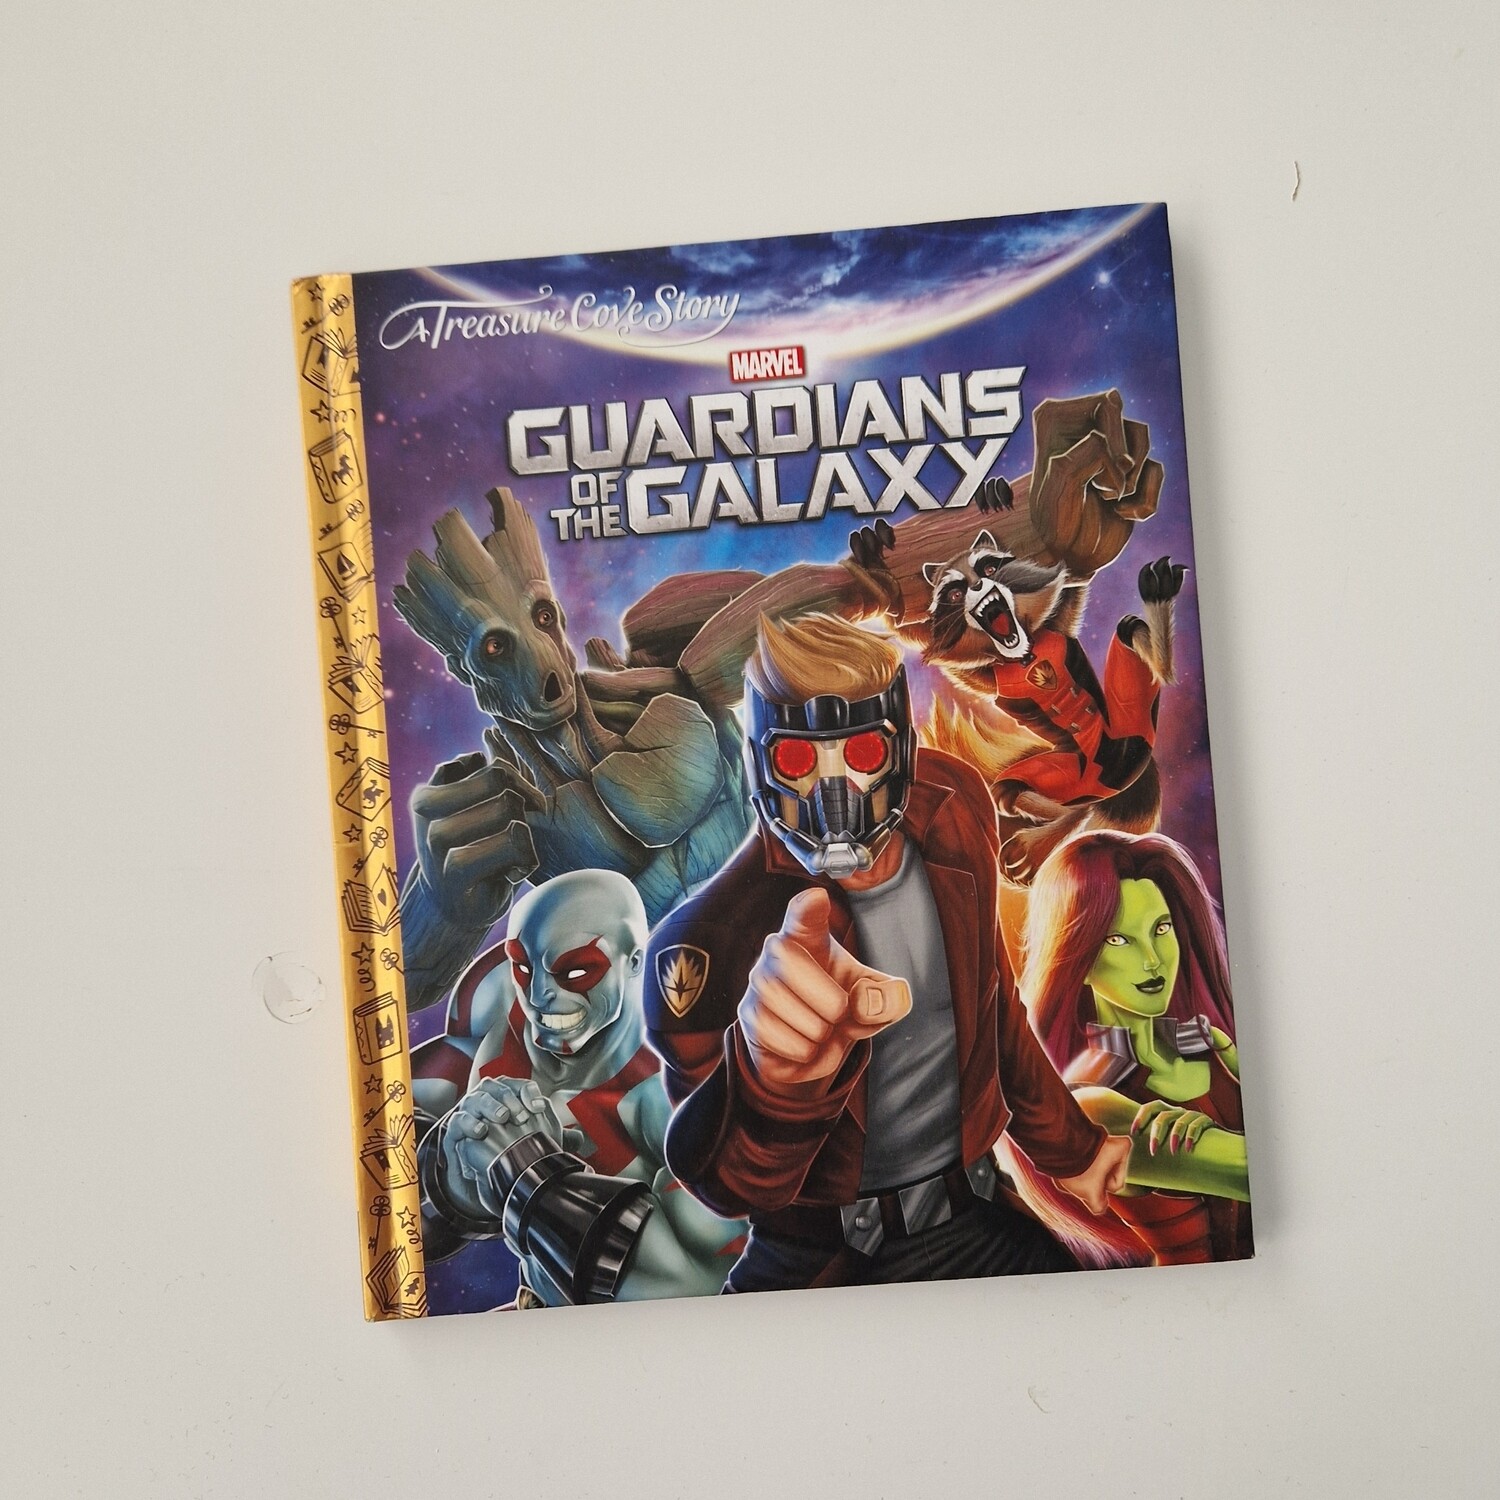 Guardians of the Galaxy Notebook